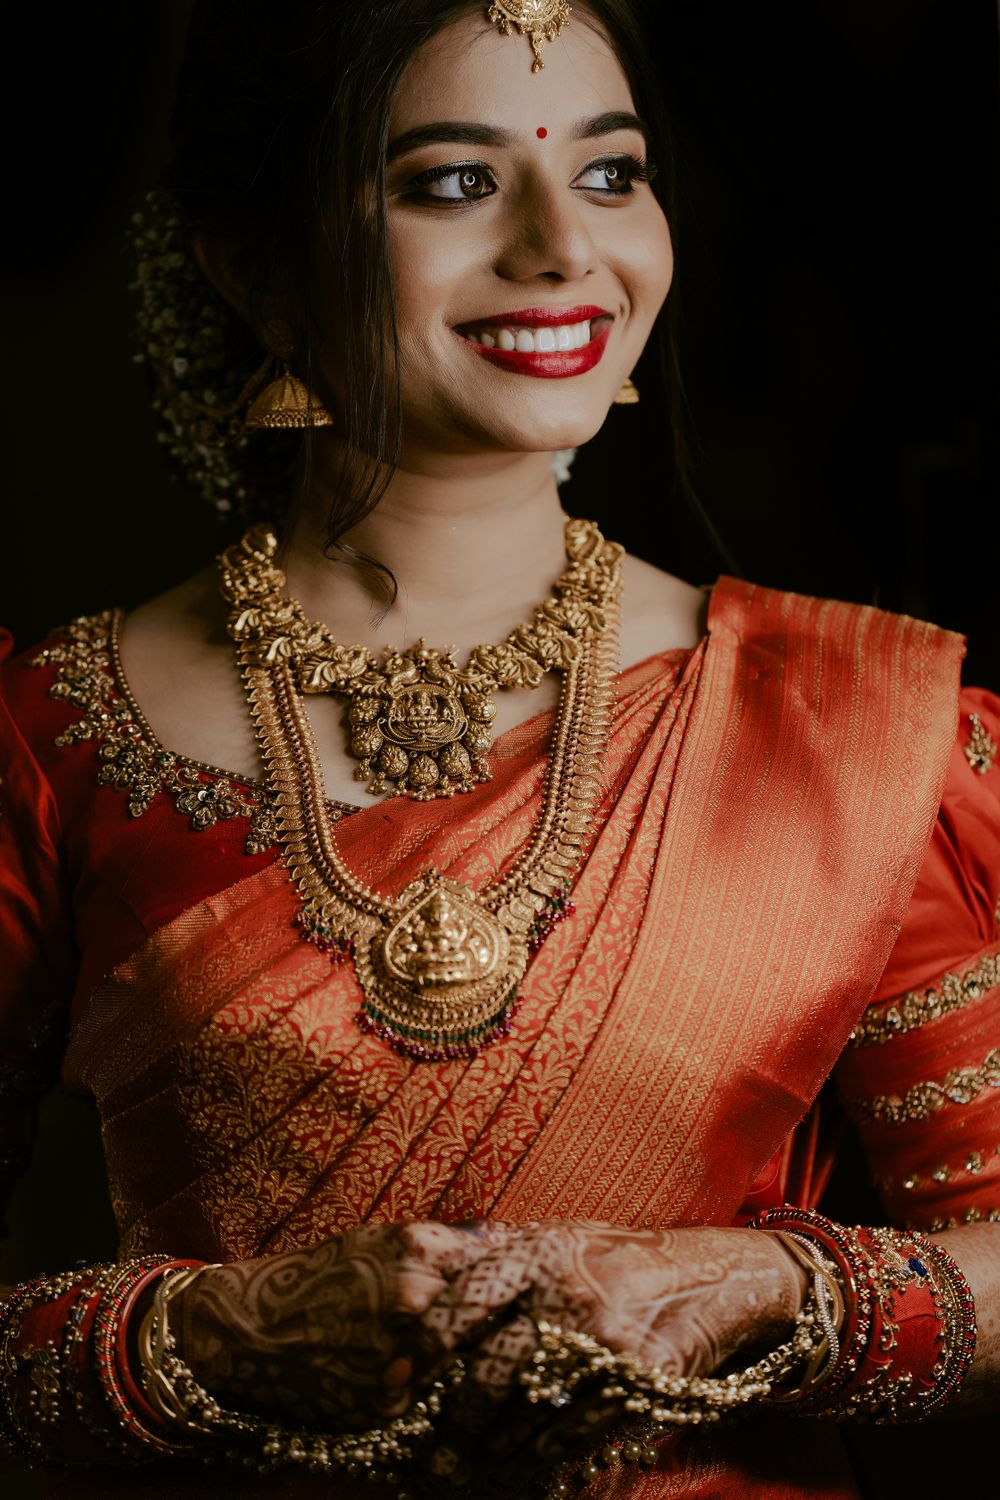 Photo of south indian bride with layered temple jewellery necklaces